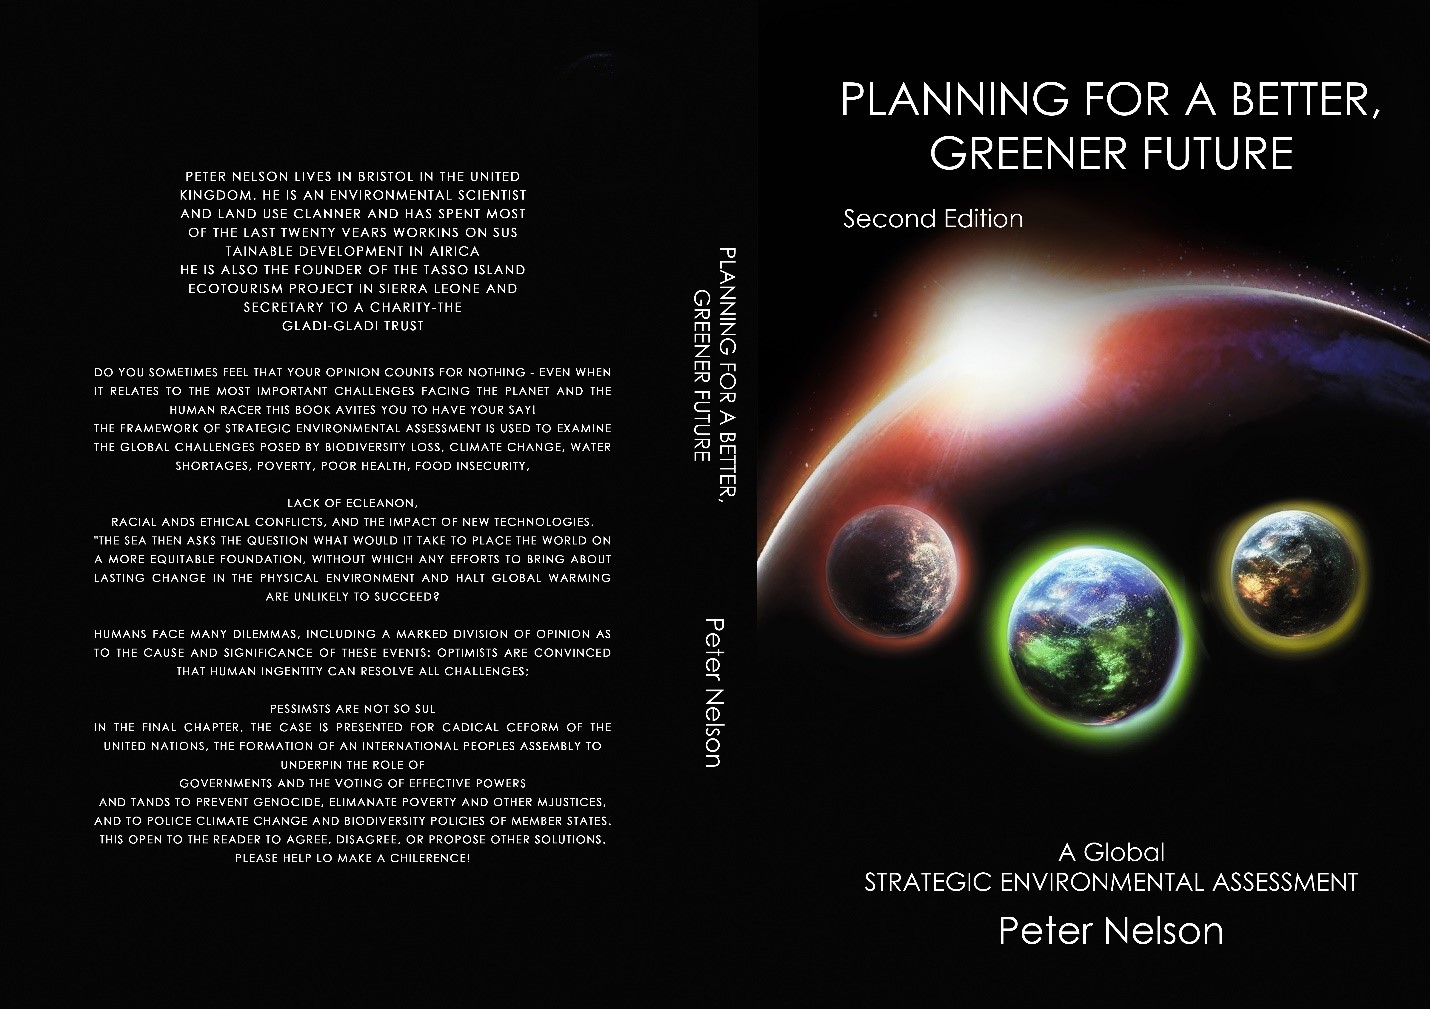 Unlock The Voice and Shape of  World: "Planning For A Better, Greener Future" Empowers Readers to Drive Change.